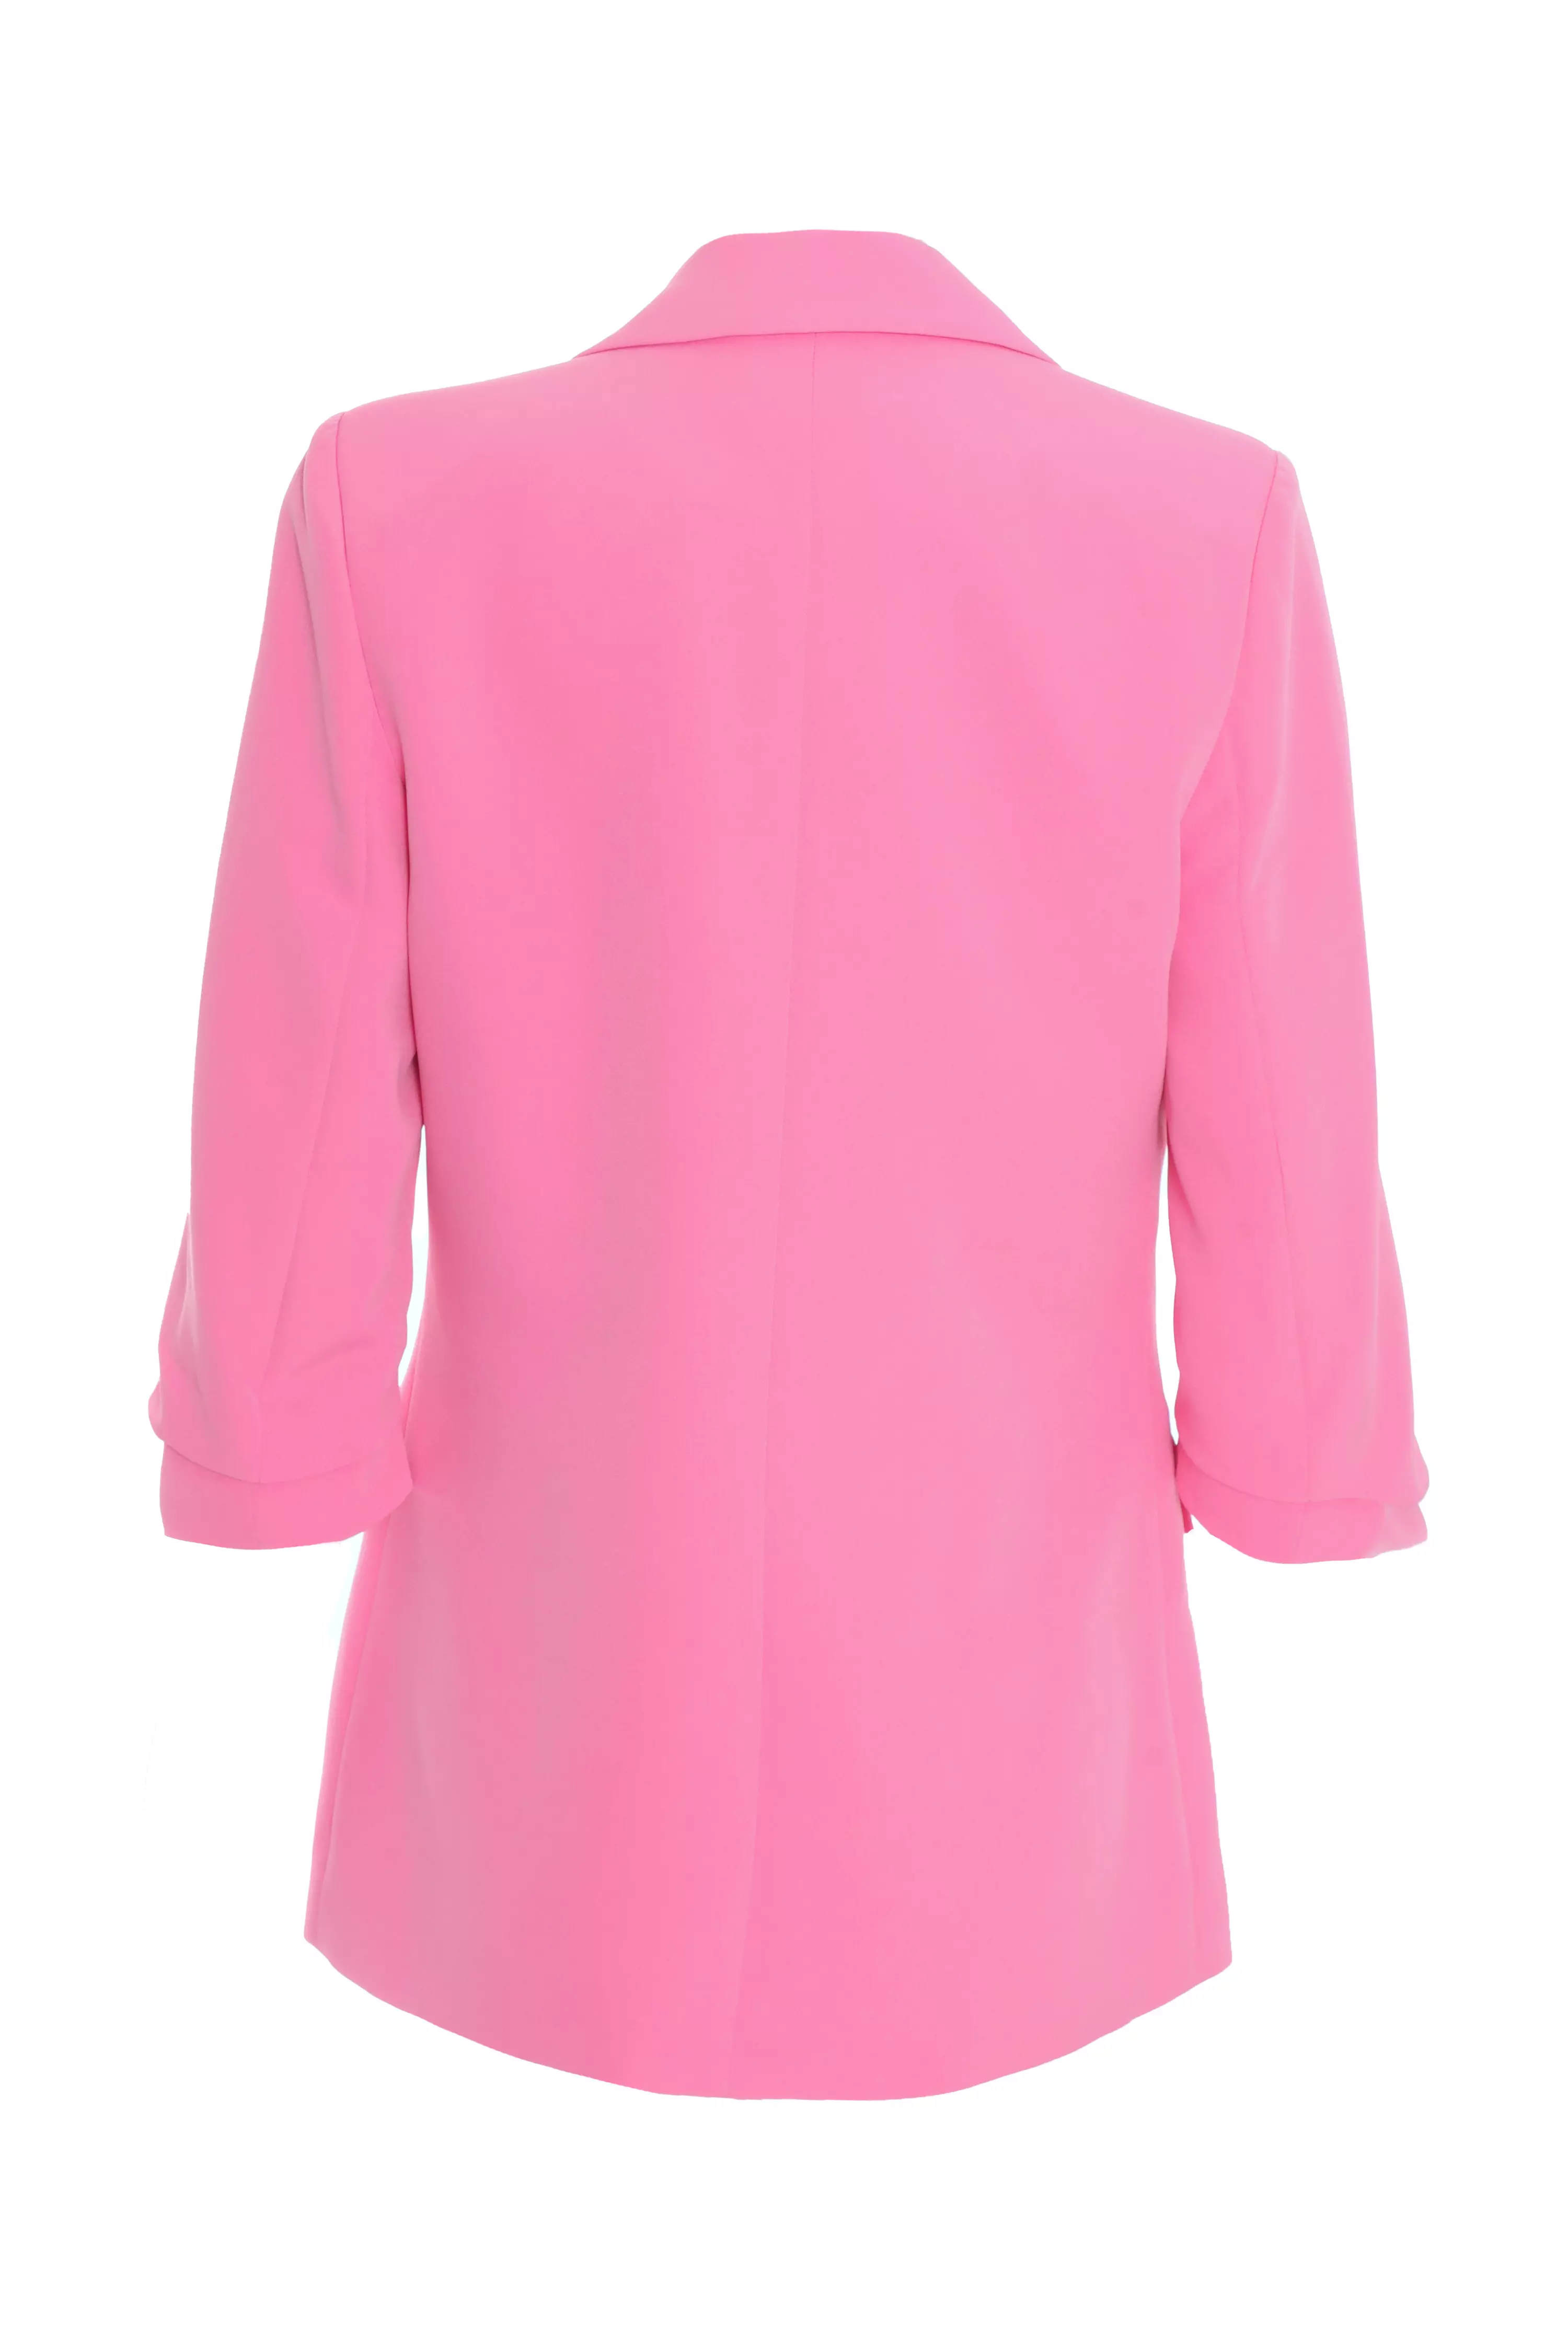 Petite Pink Ruched Tailored Blazer